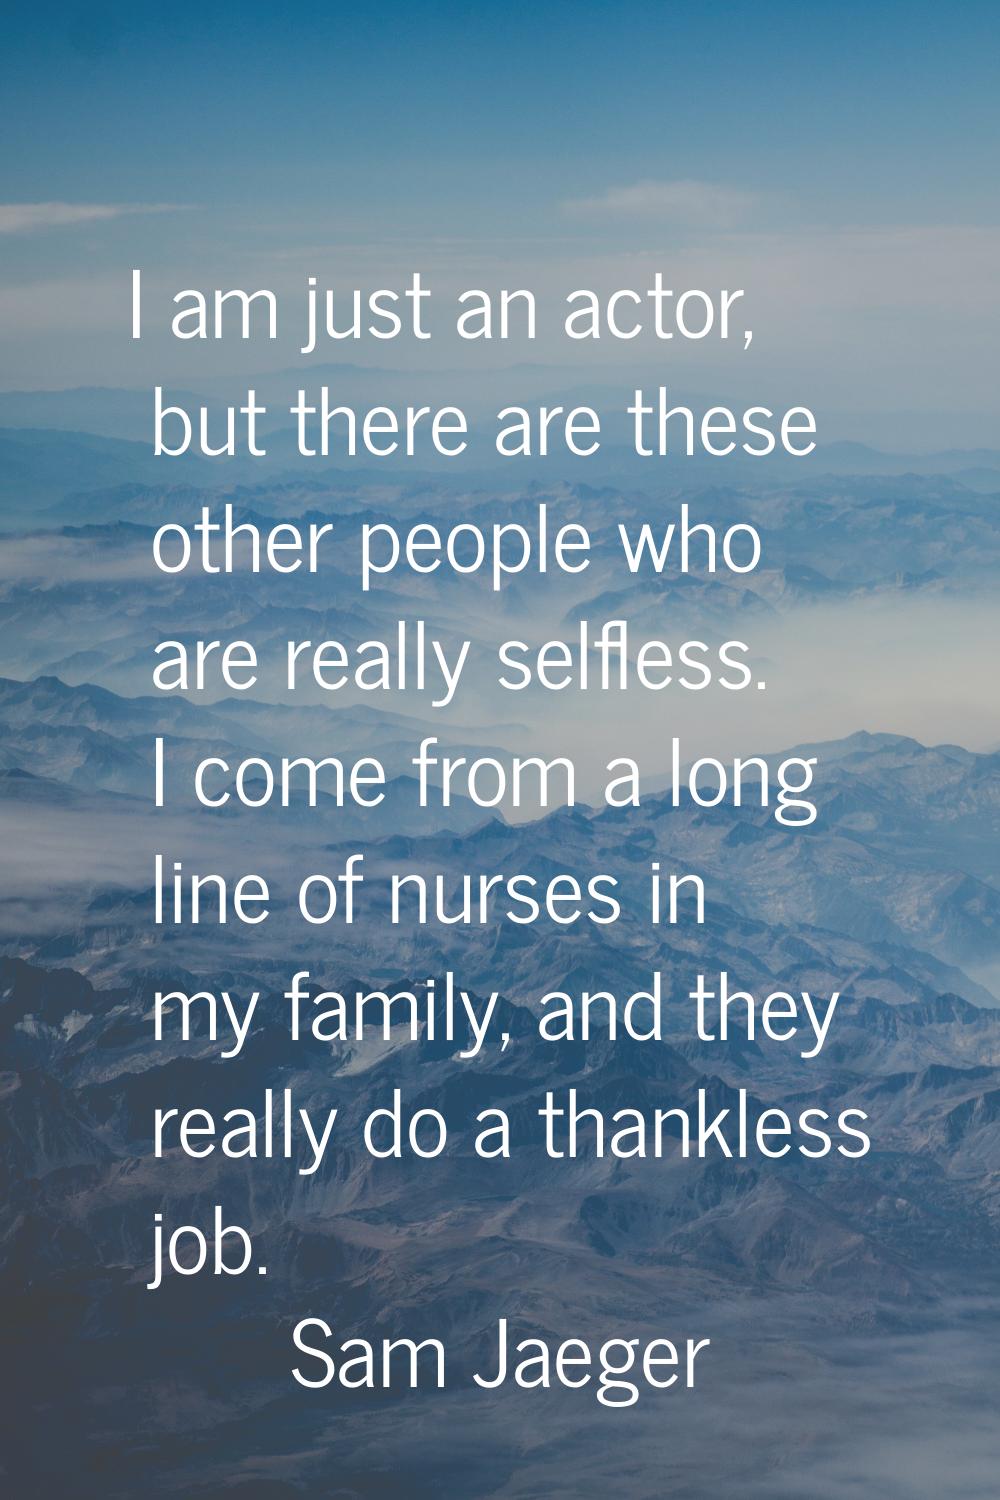 I am just an actor, but there are these other people who are really selfless. I come from a long li